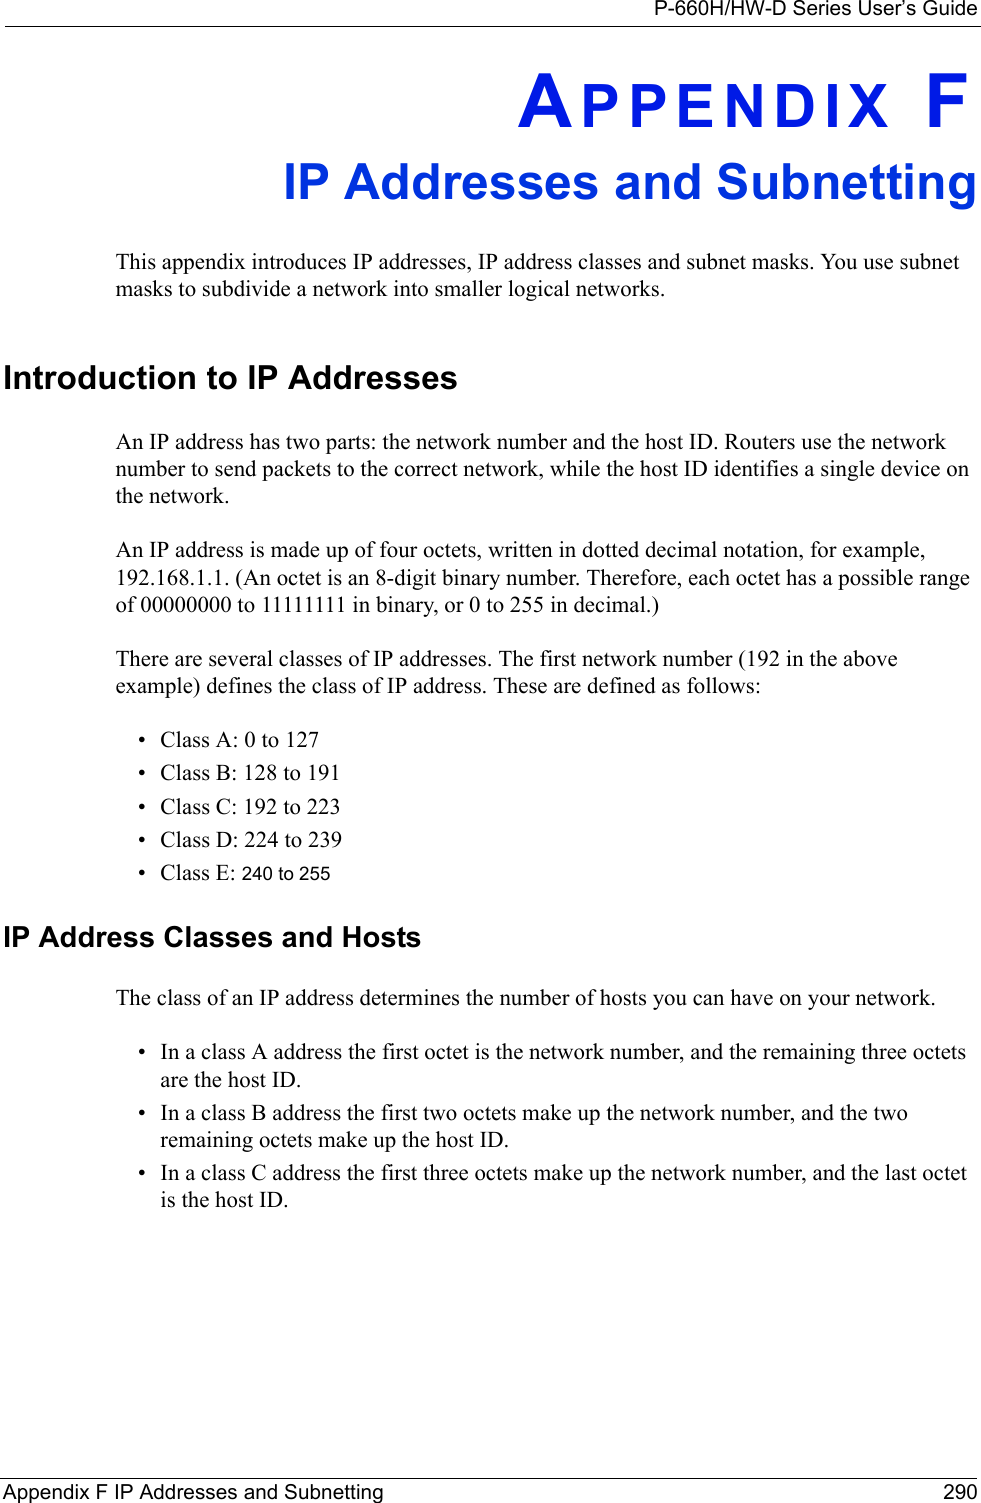 P-660H/HW-D Series User’s GuideAppendix F IP Addresses and Subnetting 290APPENDIX FIP Addresses and SubnettingThis appendix introduces IP addresses, IP address classes and subnet masks. You use subnet masks to subdivide a network into smaller logical networks.Introduction to IP AddressesAn IP address has two parts: the network number and the host ID. Routers use the network number to send packets to the correct network, while the host ID identifies a single device on the network.An IP address is made up of four octets, written in dotted decimal notation, for example, 192.168.1.1. (An octet is an 8-digit binary number. Therefore, each octet has a possible range of 00000000 to 11111111 in binary, or 0 to 255 in decimal.)There are several classes of IP addresses. The first network number (192 in the above example) defines the class of IP address. These are defined as follows:• Class A: 0 to 127• Class B: 128 to 191• Class C: 192 to 223• Class D: 224 to 239• Class E: 240 to 255 IP Address Classes and HostsThe class of an IP address determines the number of hosts you can have on your network.• In a class A address the first octet is the network number, and the remaining three octets are the host ID. • In a class B address the first two octets make up the network number, and the two remaining octets make up the host ID.• In a class C address the first three octets make up the network number, and the last octet is the host ID.